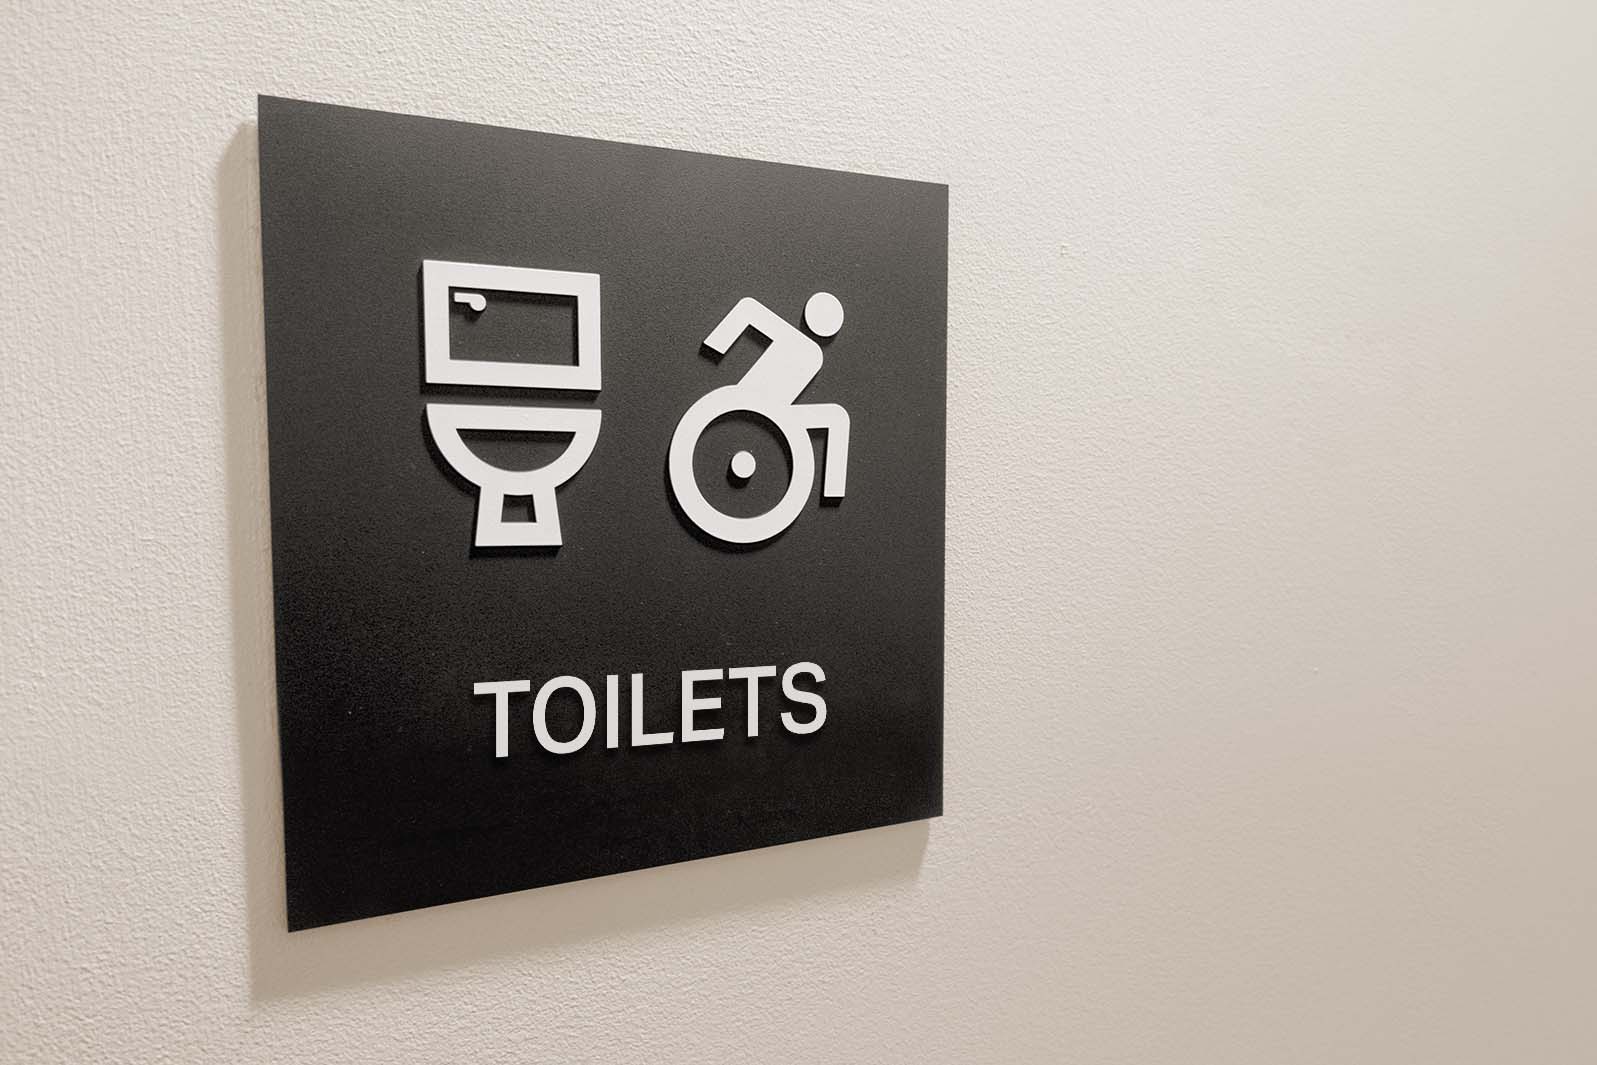 Toilet signs should incorporate well-contrasted tactile text and symbols, benefitting both sighted and blind/partially sighted users.